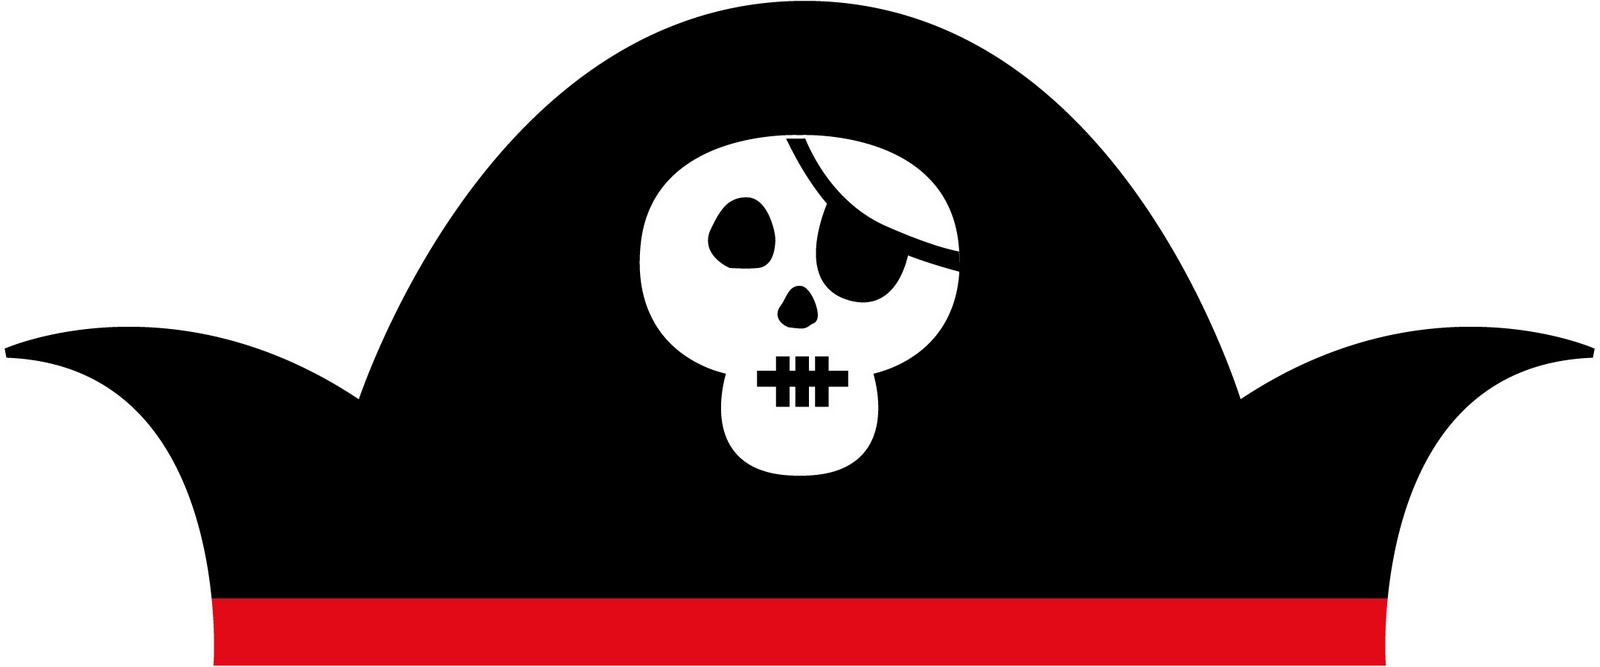 Pirate Hat Clip Art Black And White Pirate Hat Clipart   Clipart